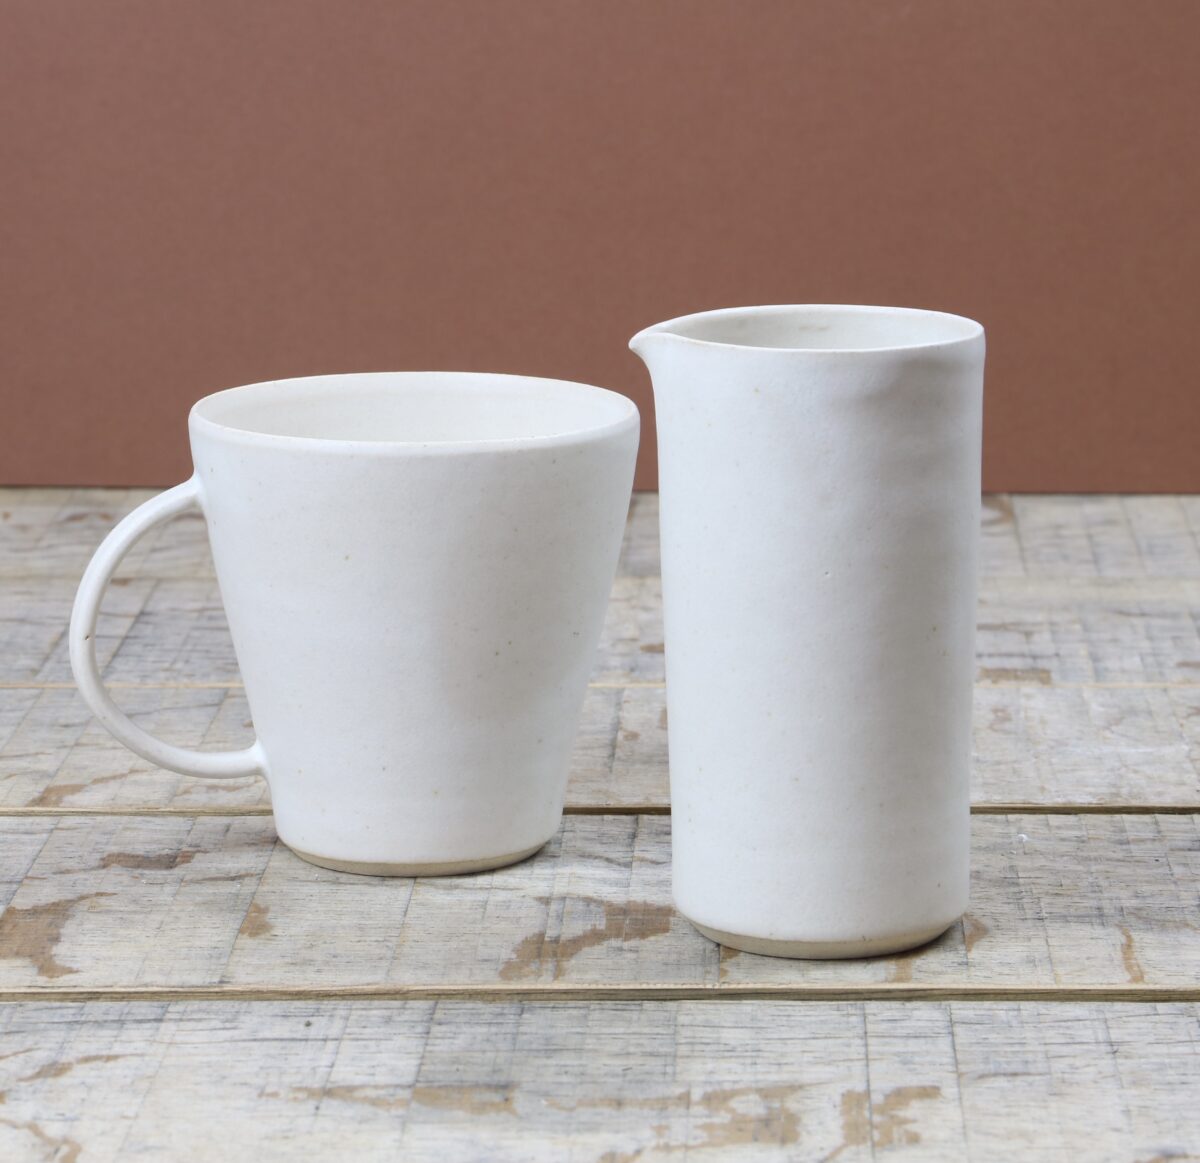 Two white Everyday cups and a pitcher on a wooden table.